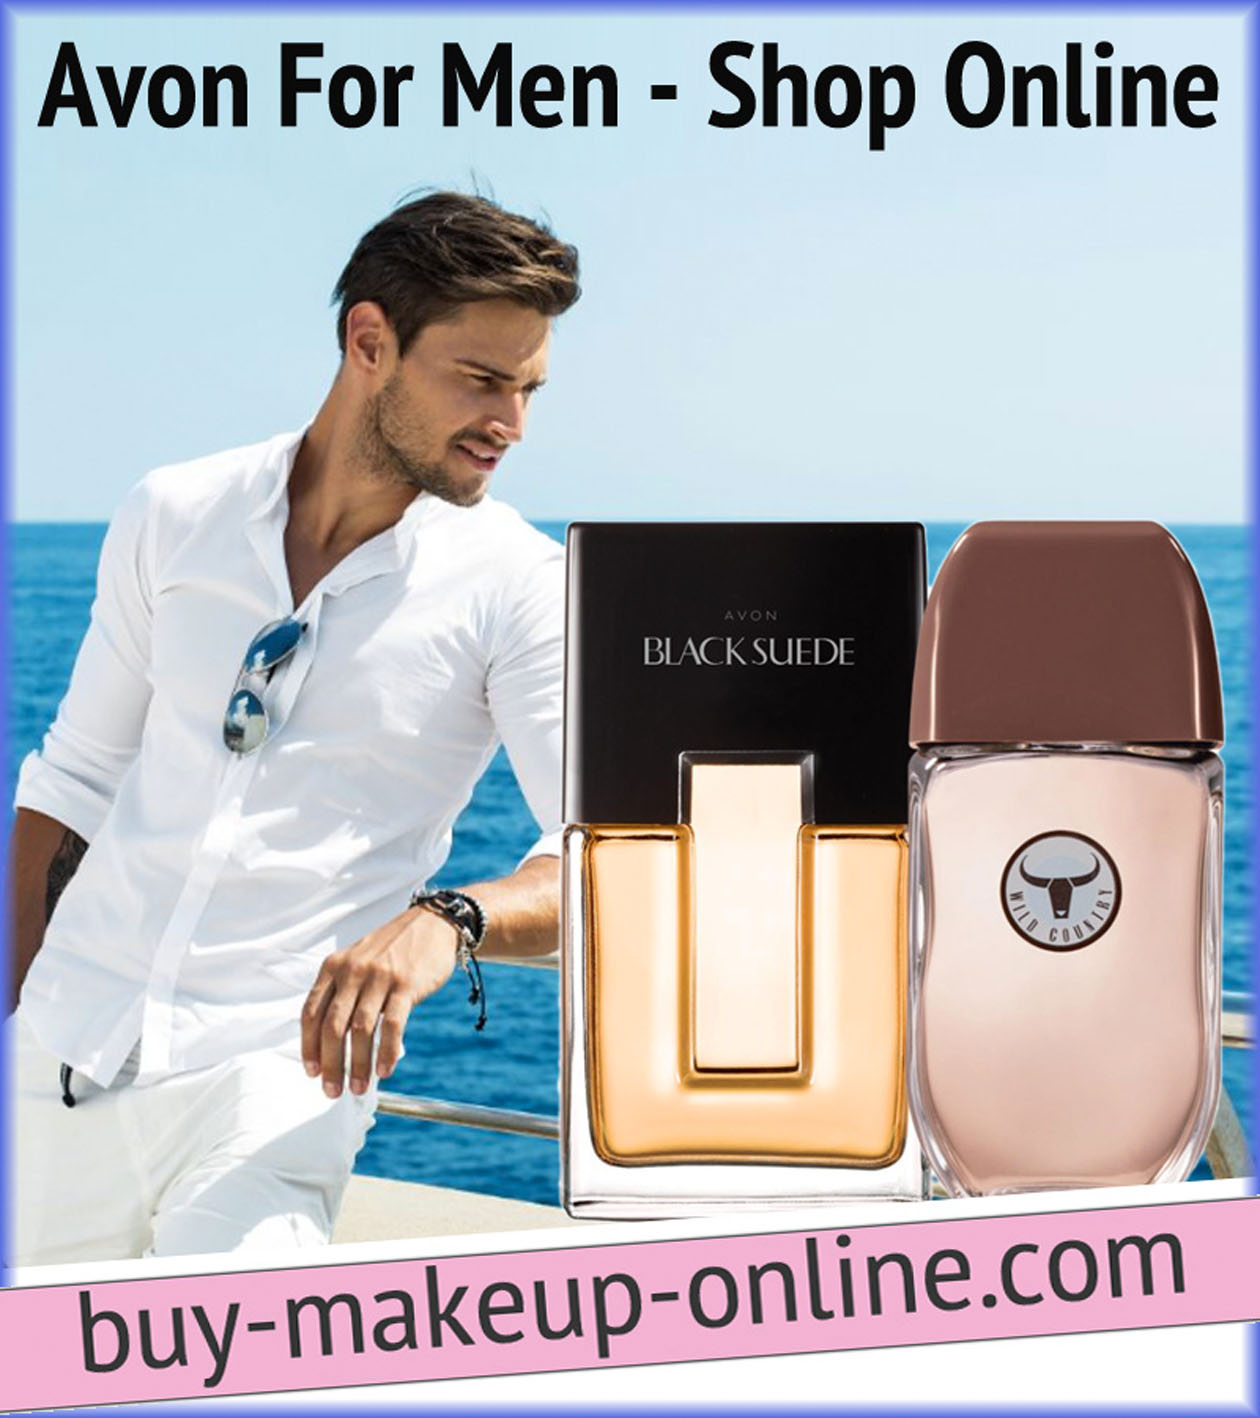 Avon For Men Aftershave Cologne Grooming Needs 